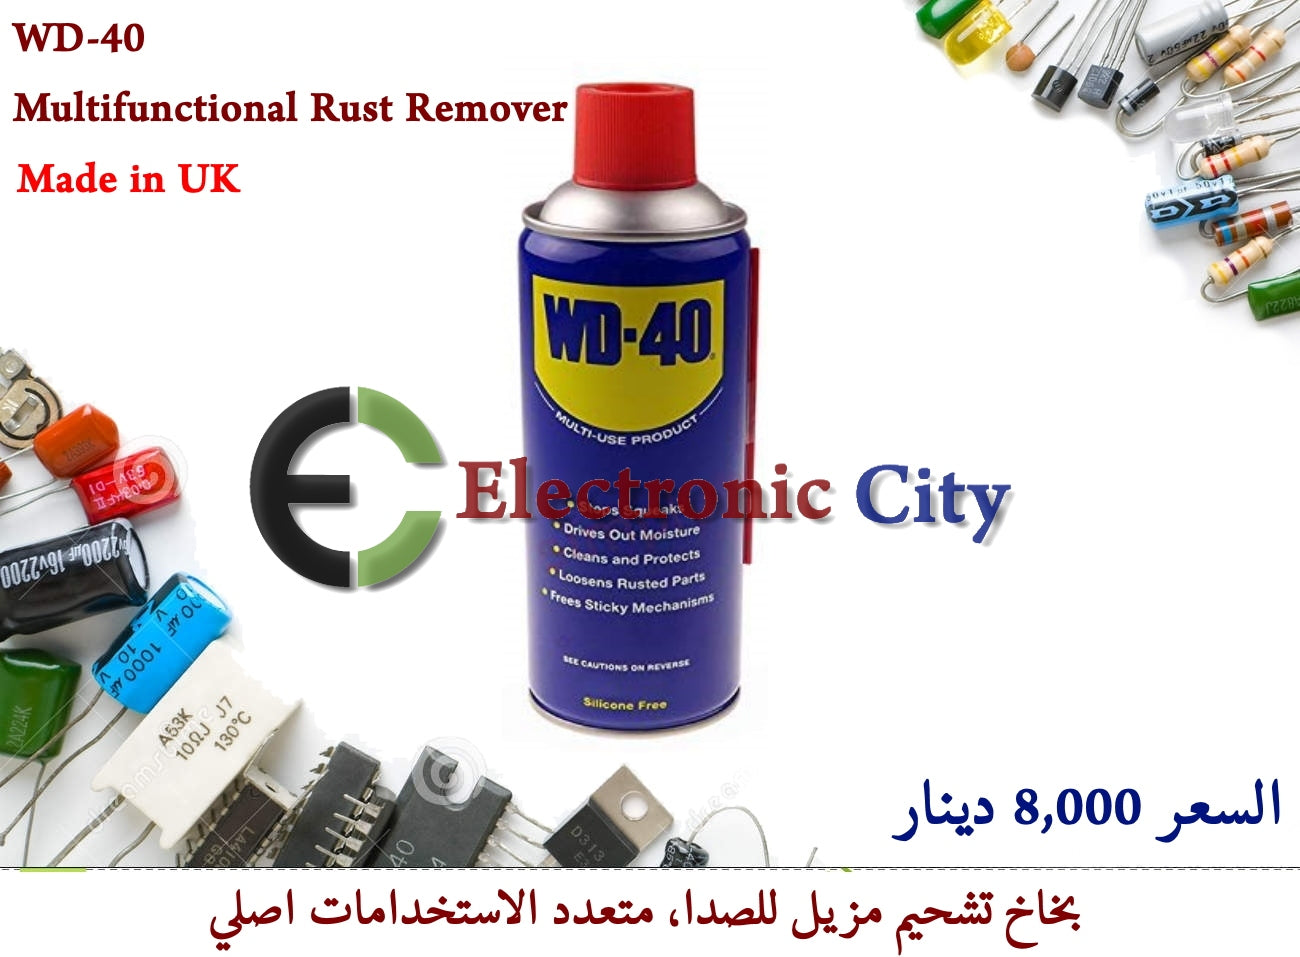 WD-40 Multifunctional Rust Remover